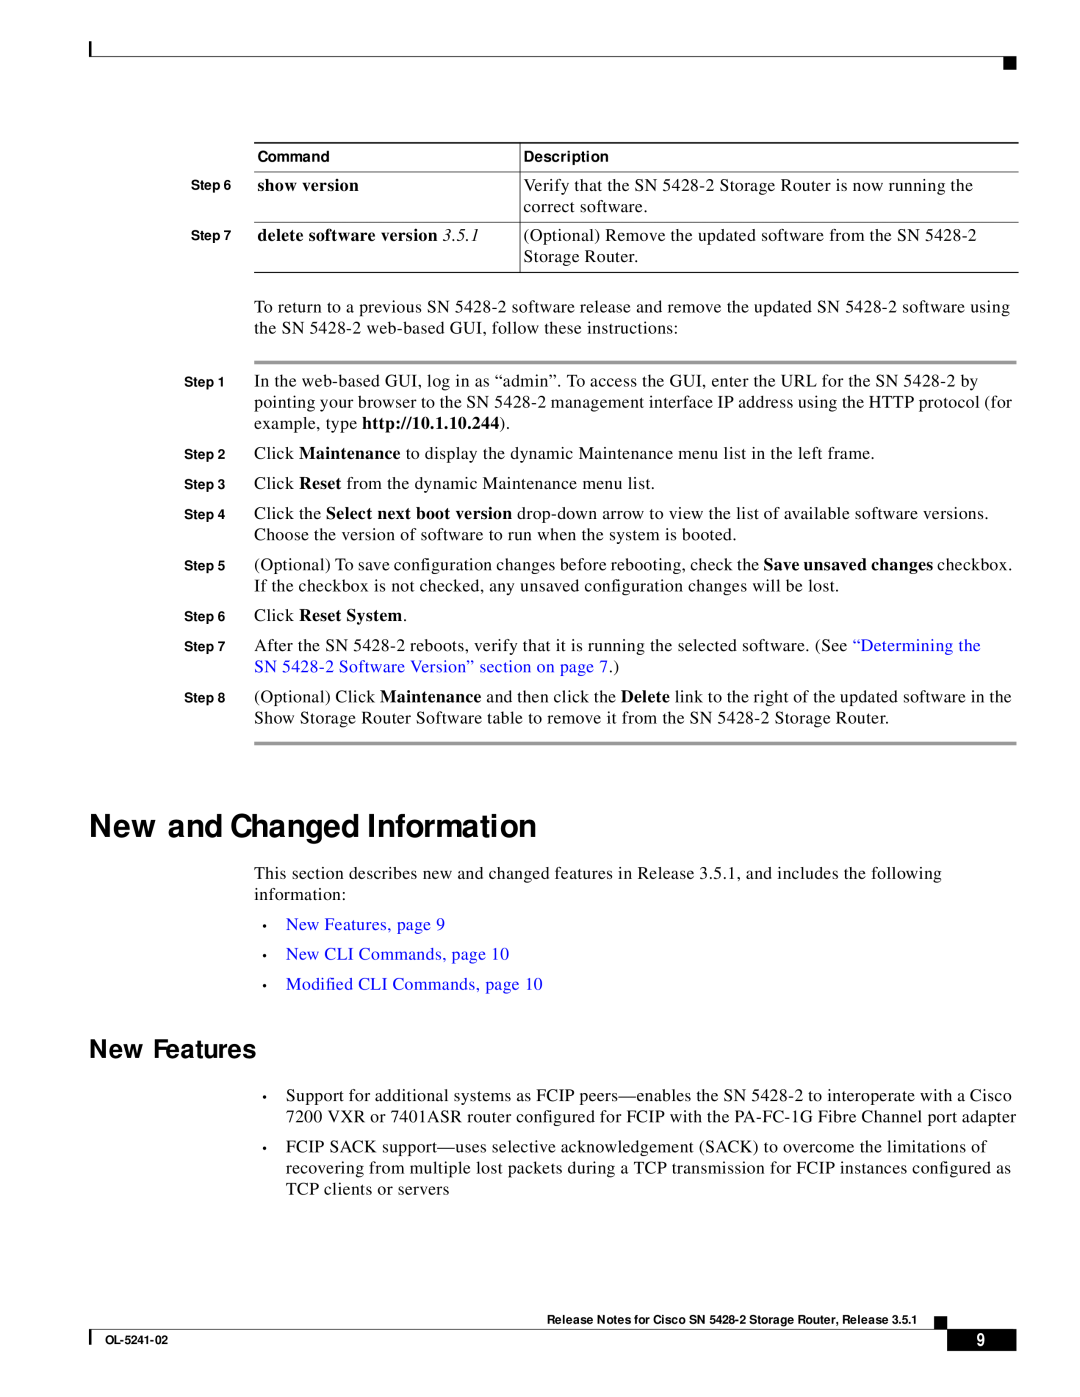 Cisco Systems SN 5428-2 manual New and Changed Information, New Features, Command, Description 